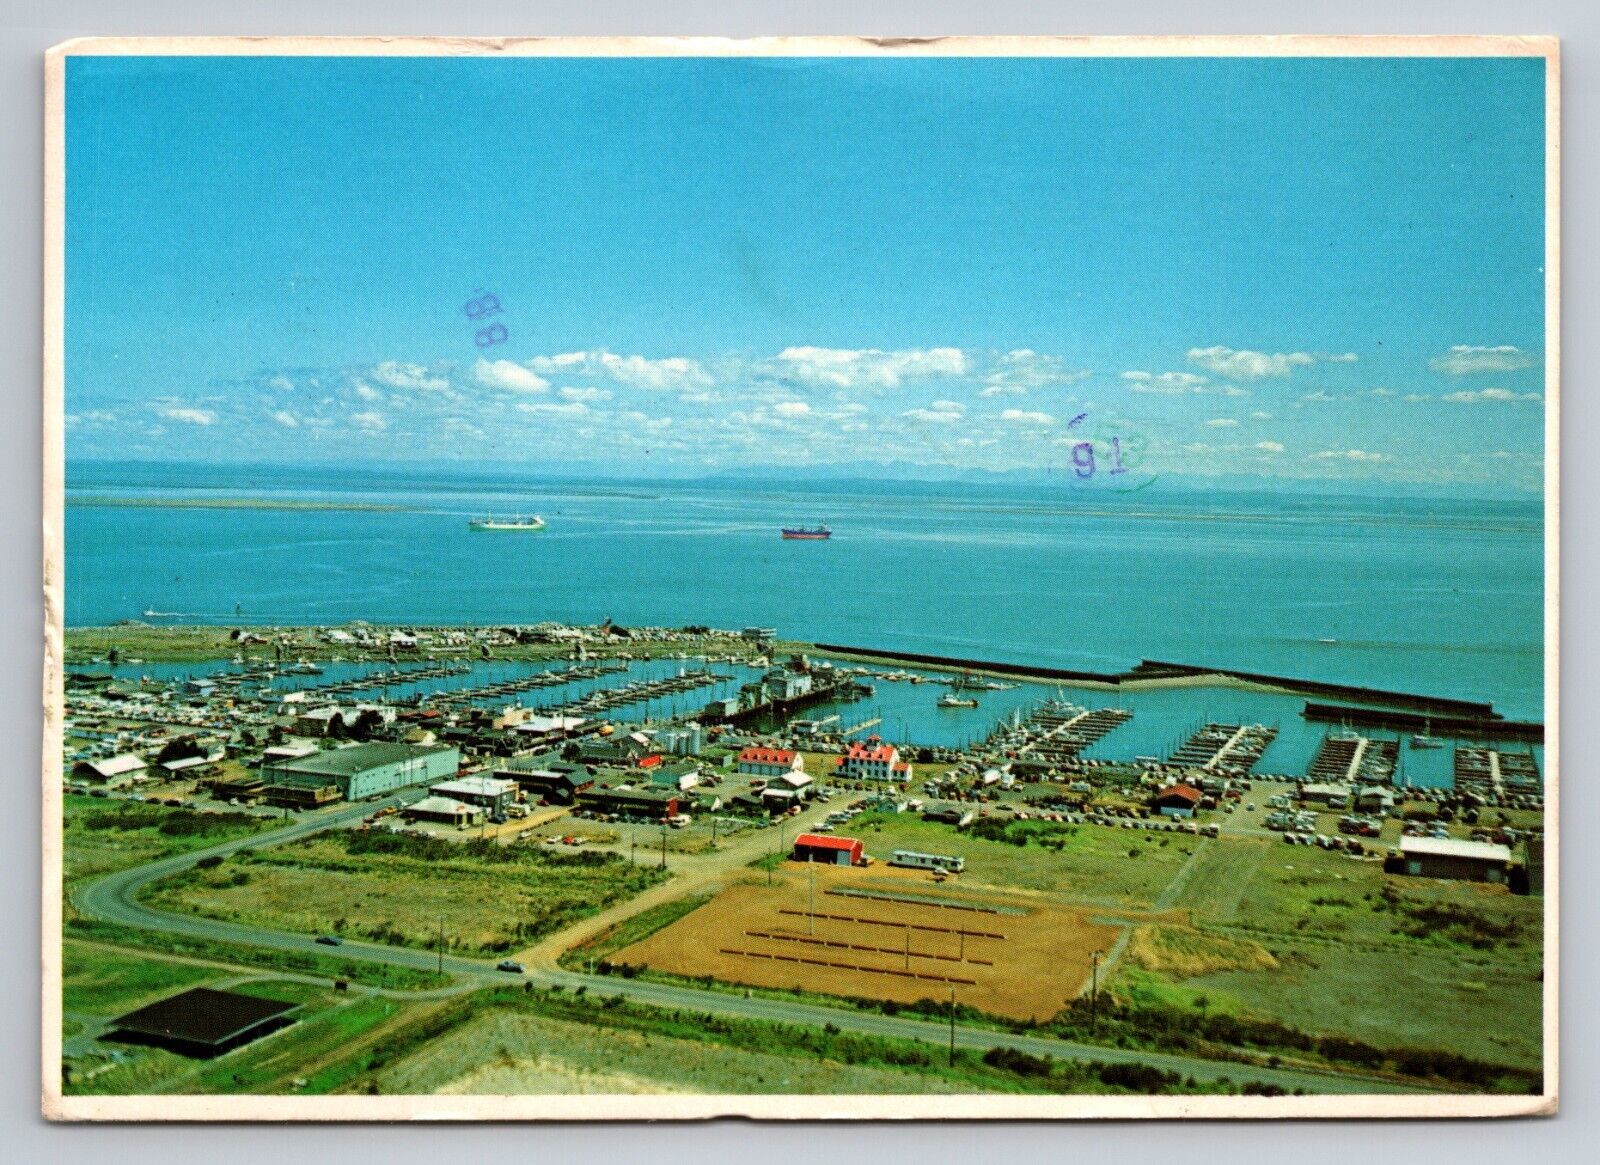 Westport Washington Salmon Capital Of The World Posted 1980 Aerial View